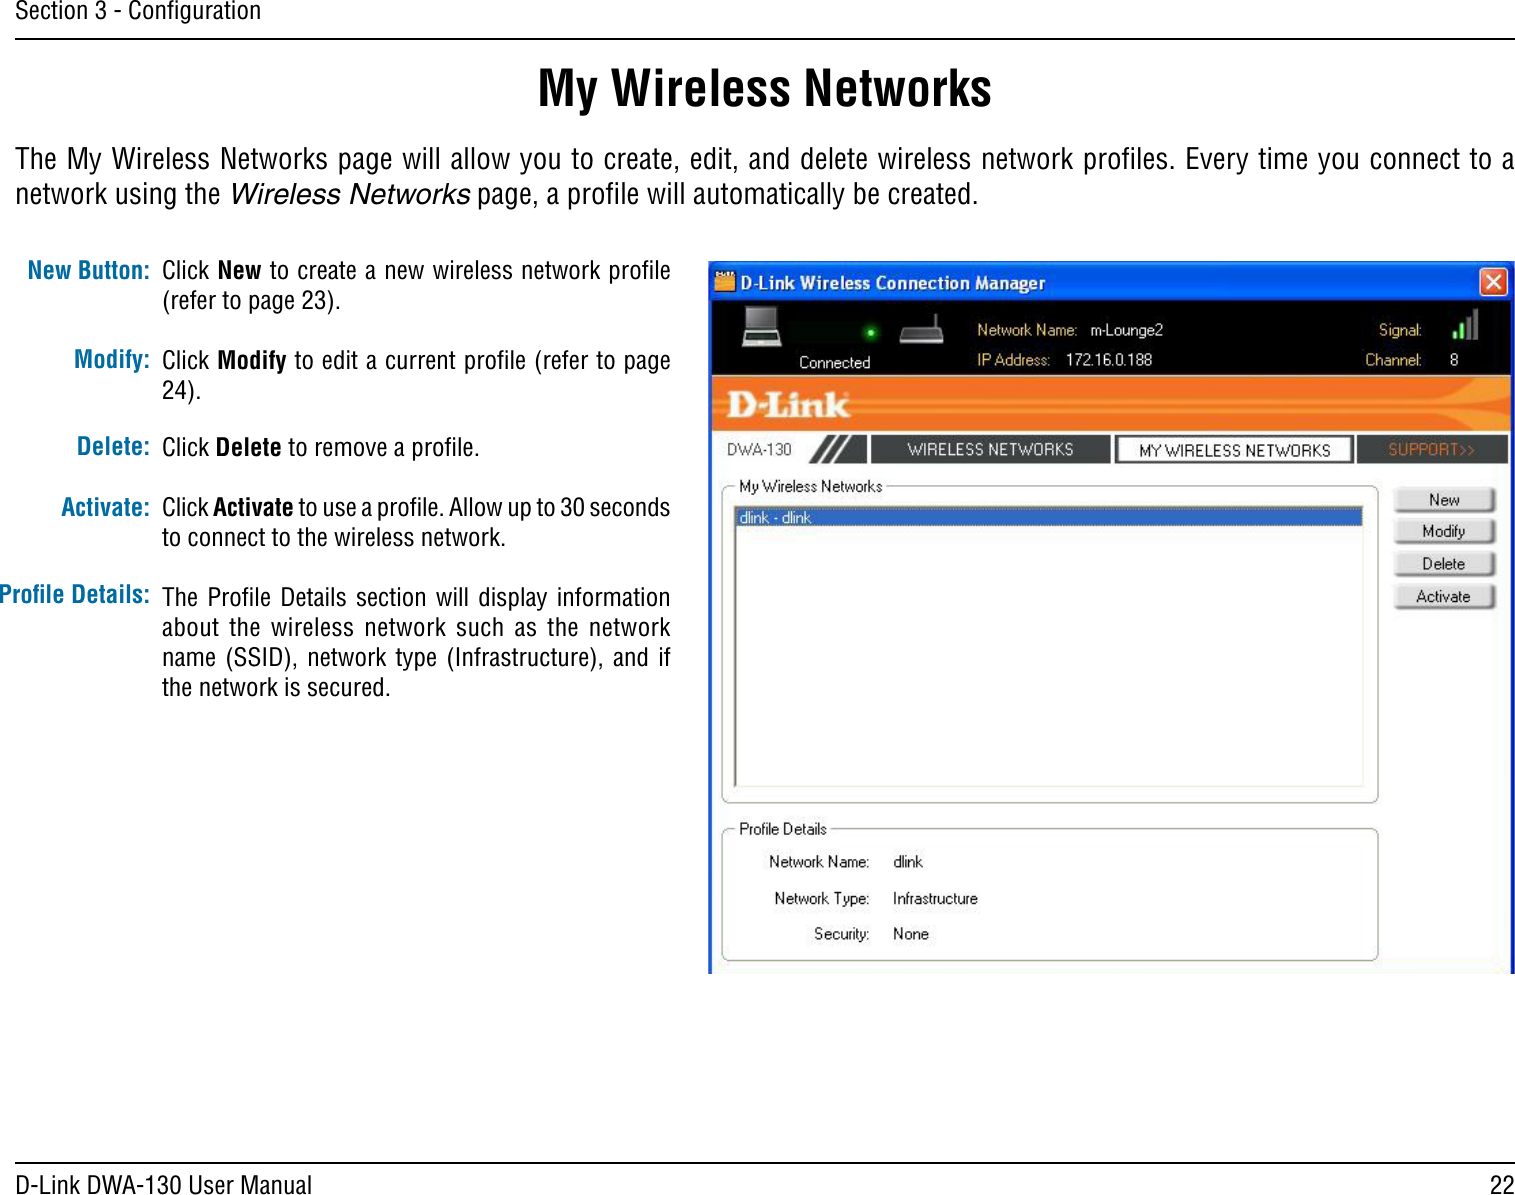 22D-Link DWA-130 User ManualSection 3 - ConﬁgurationMy Wireless NetworksThe My Wireless Networks page will allow you to create, edit, and delete wireless network proﬁles. Every time you connect to a network using the Wireless Networks page, a proﬁle will automatically be created. New Button:Modify:Click New to create a new wireless network proﬁle (refer to page 23).Click Modify to edit a current proﬁle (refer to page 24).Click Delete to remove a proﬁle.Click Activate to use a proﬁle. Allow up to 30 seconds to connect to the wireless network.The Proﬁle  Details section  will  display information about  the  wireless  network  such  as  the  network name (SSID),  network type  (Infrastructure),  and if the network is secured.Delete:Activate:Proﬁle Details: